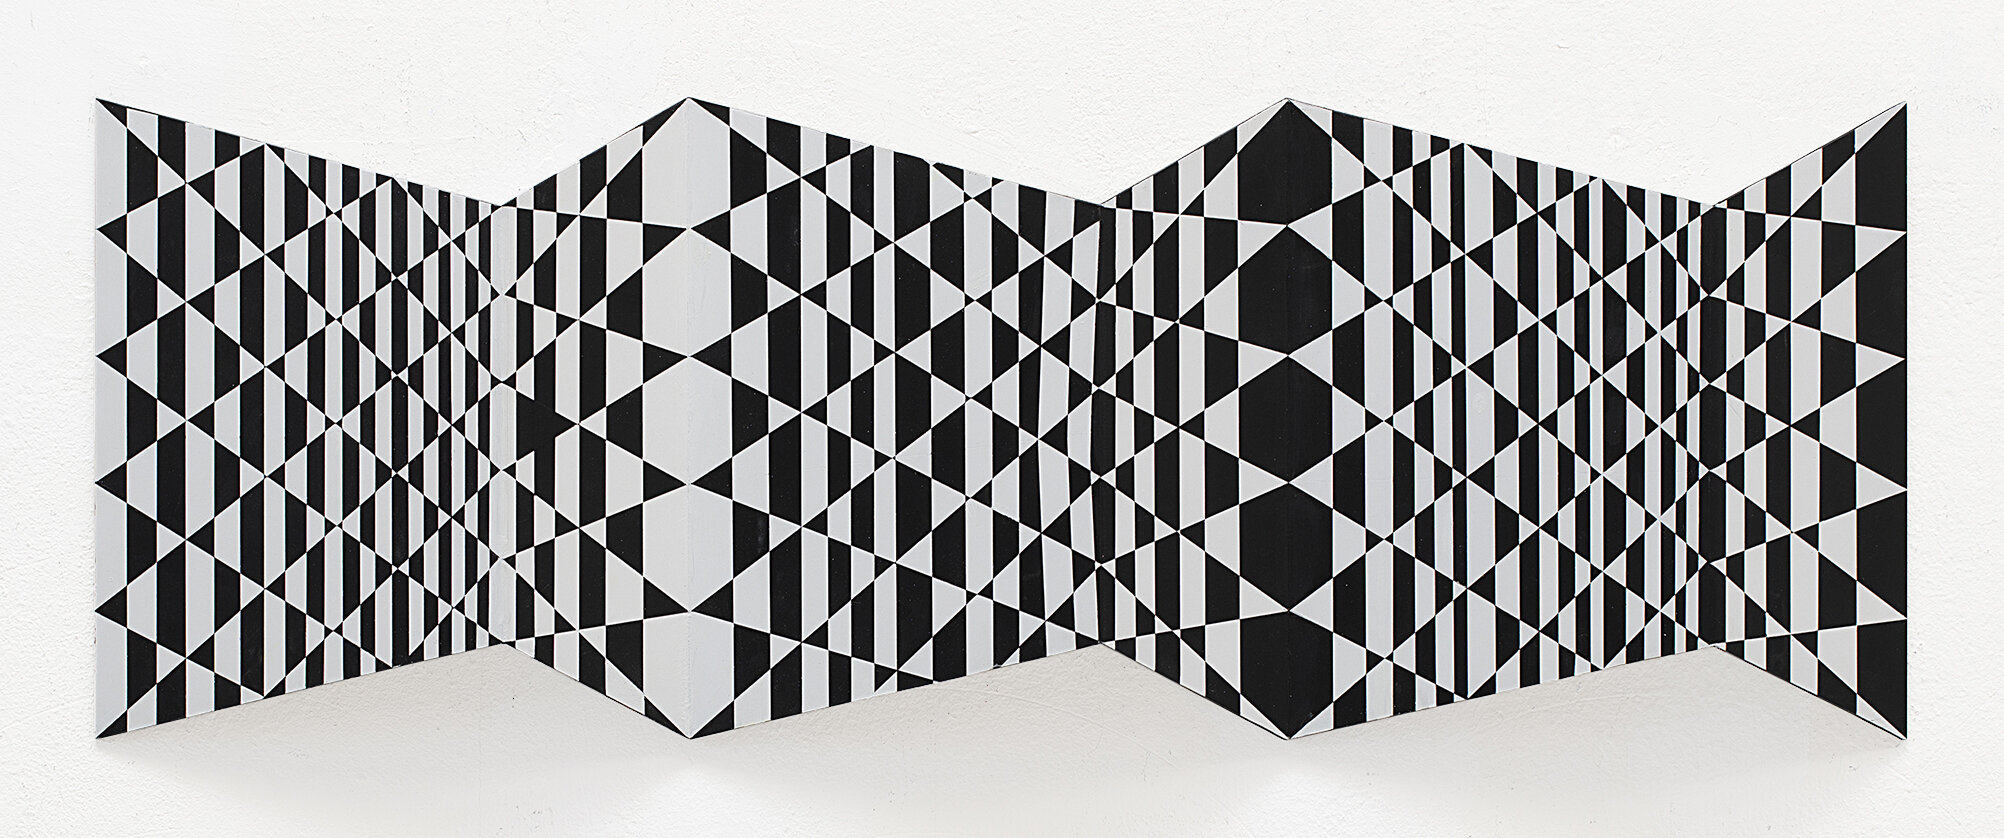 PALINDROME, für R. Helmer, 13 x 37 x 2.25 inches / 33 x 94 x 6 cm, acrylic on formed aluminum panel, 2019 (Copy)